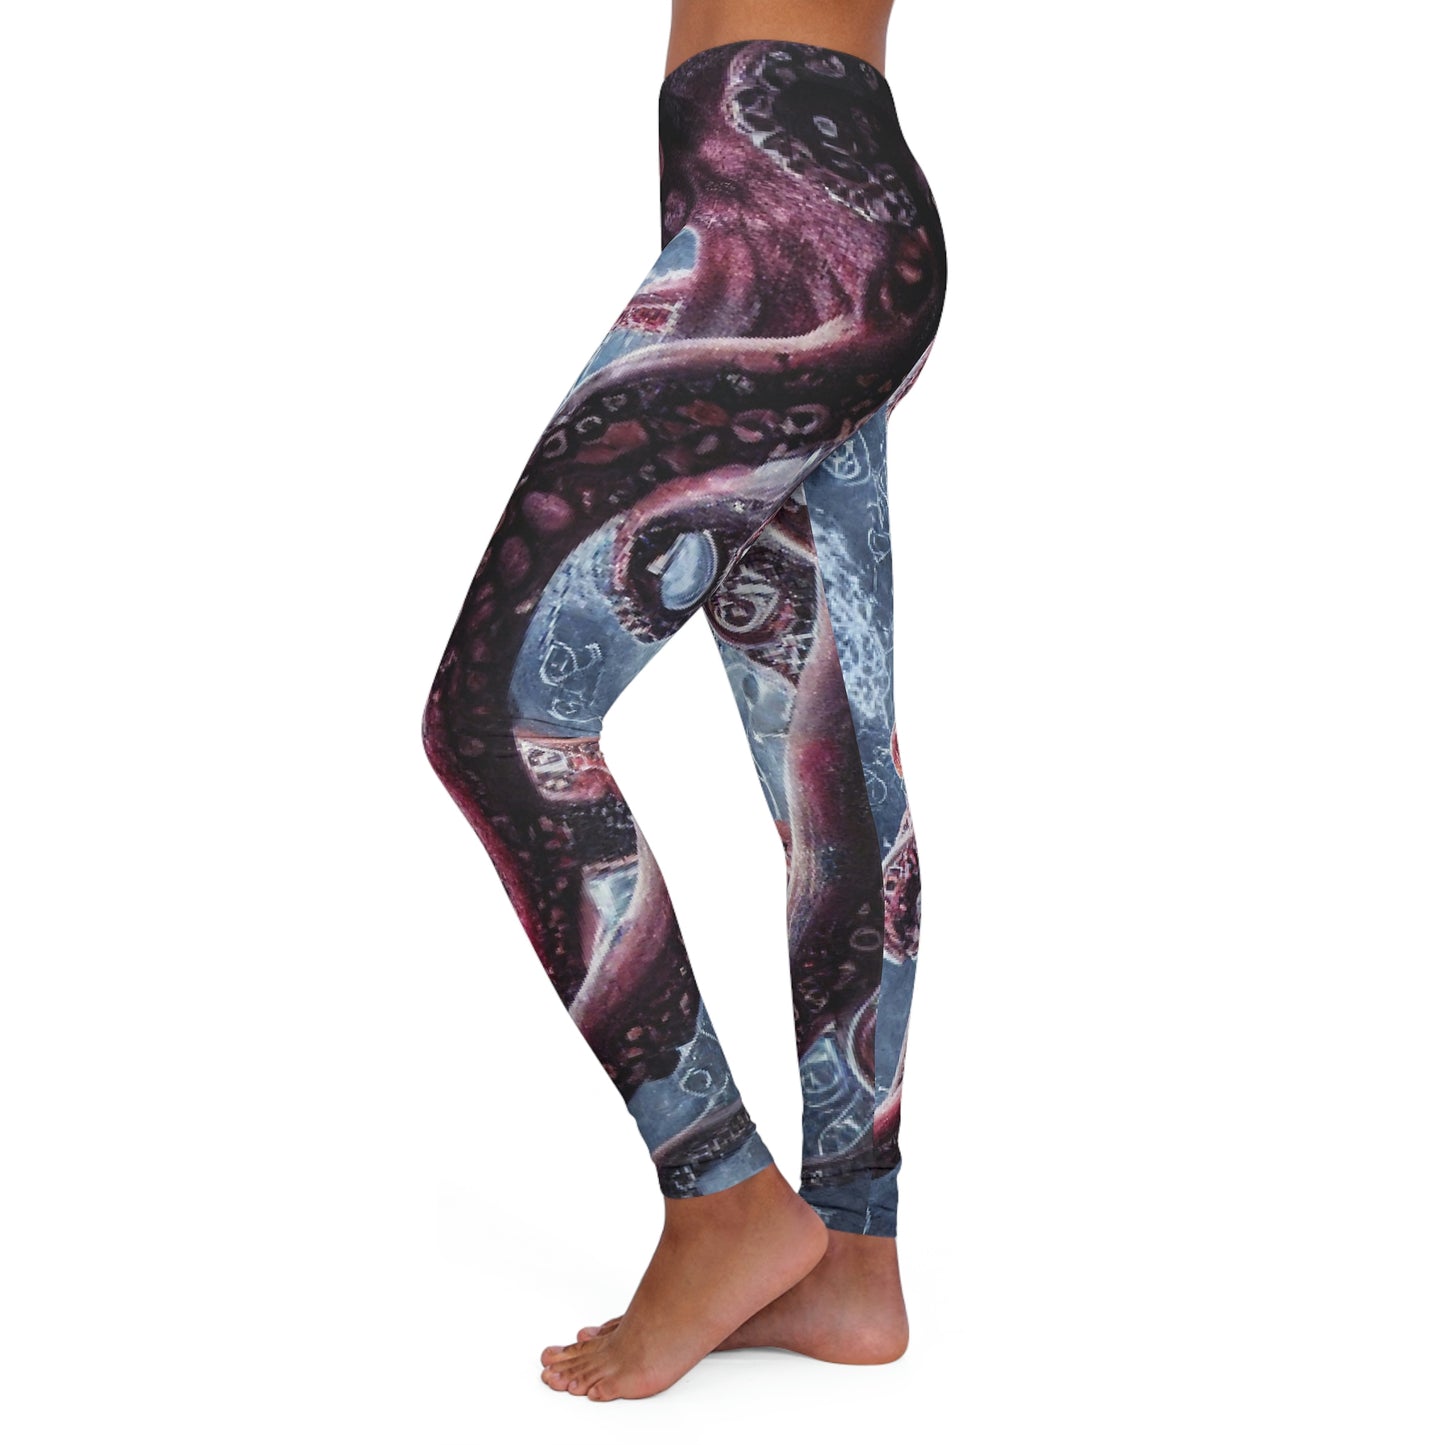 Octopus Beach Plus Size Leggings, One of a Kind Gift - Unique Workout Activewear tights for Mom fitness, Mothers Day, Girlfriend Christmas Gift